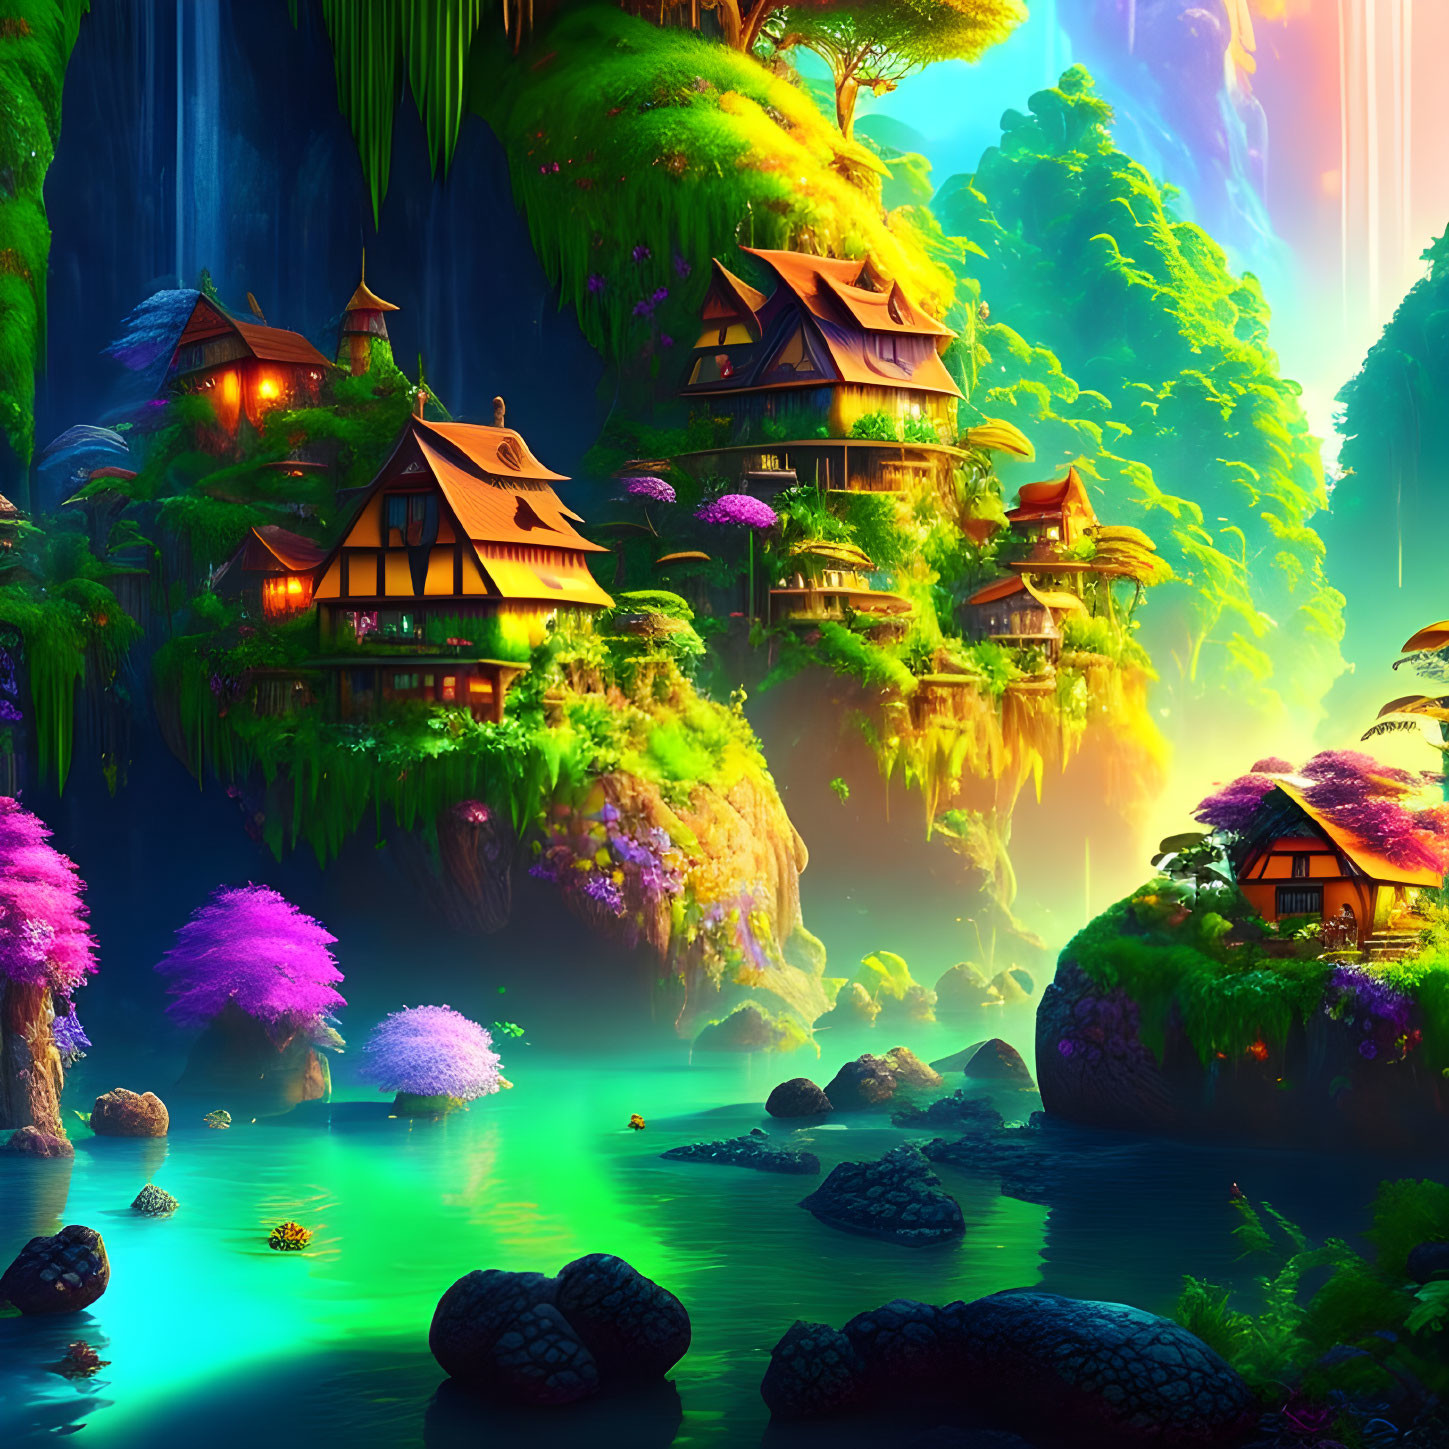 Vibrant fantasy landscape with traditional houses, cliffs, and serene lake